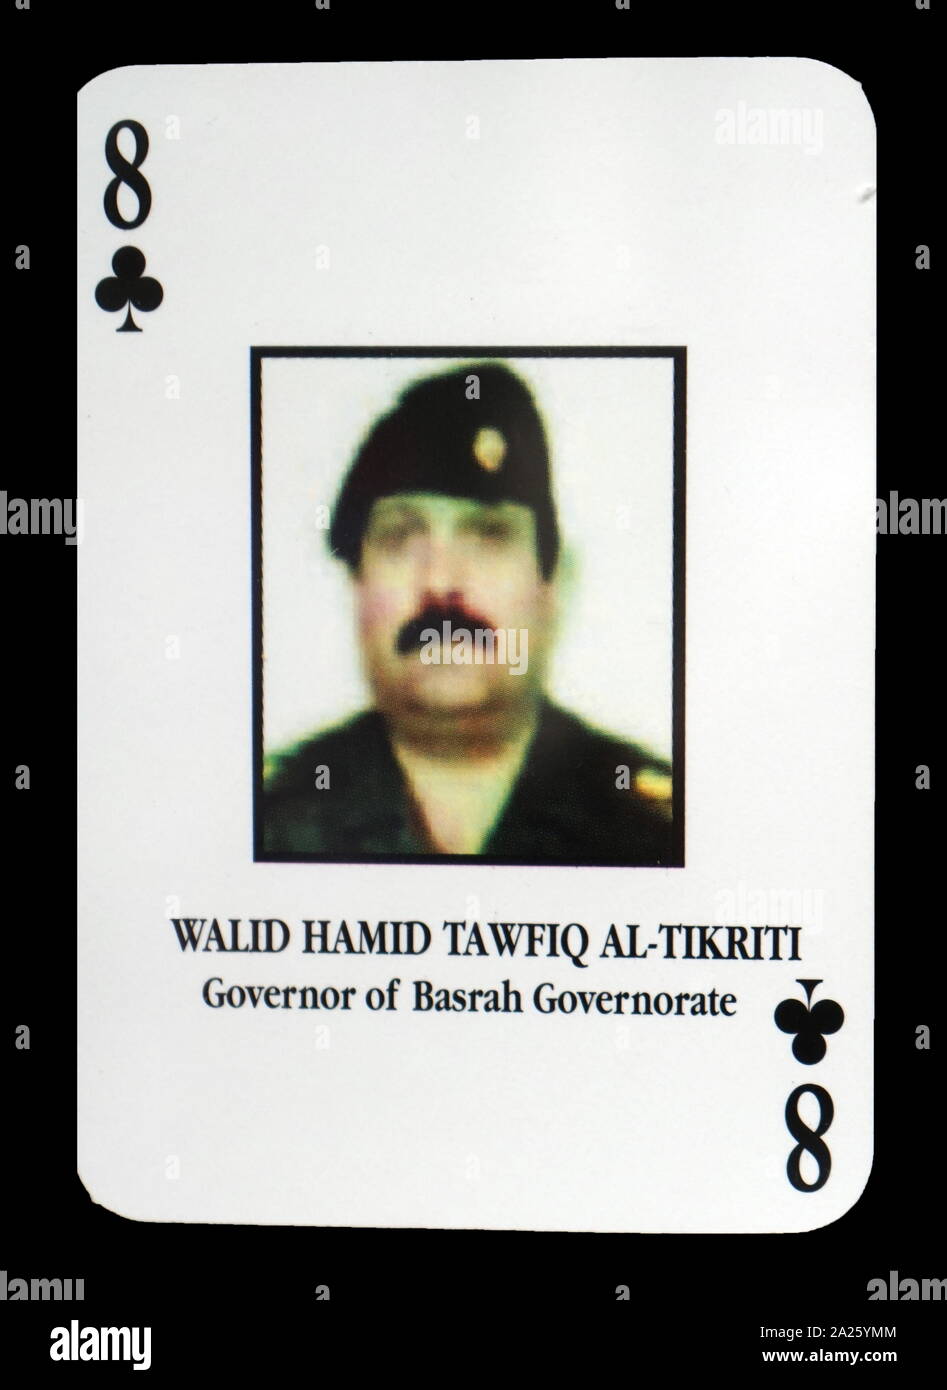 Most-wanted Iraqi playing cards - Walid Hamid Tawfiq Al-Tikriti (Governor of Basrah Governorate). The U.S. military developed a set of playing cards to help troop identify the most-wanted members of President Saddam Hussein's government during the 2003 invasion of Iraq. Stock Photo